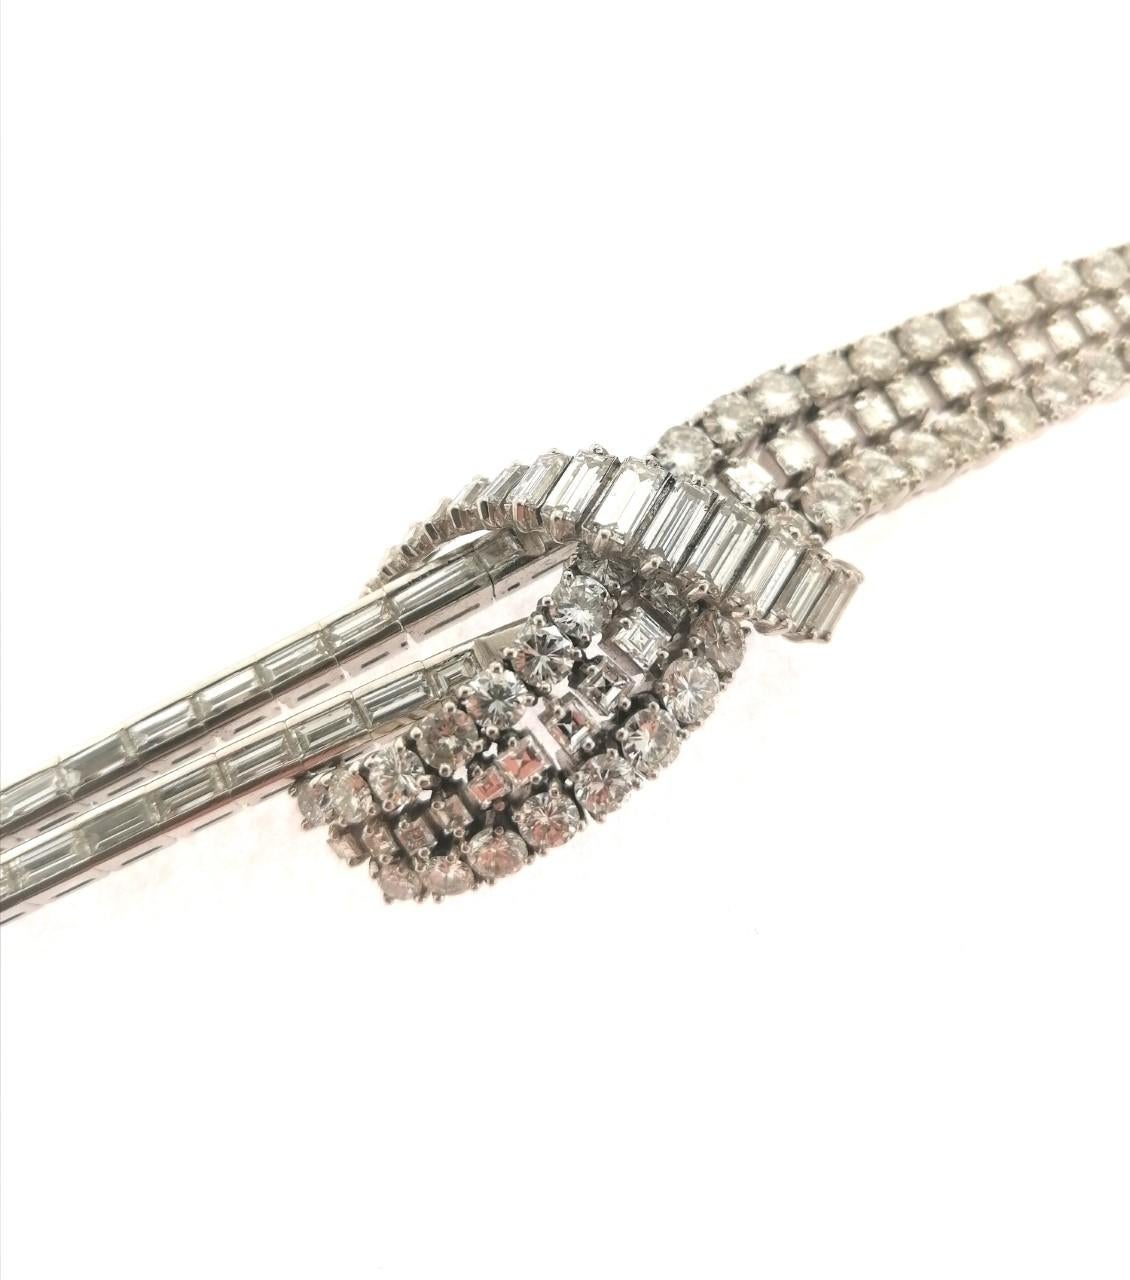 Magnificent Art Deco platinum bracelet with baguette, brilliant and carré cut diamonds. The calculated weight of the stones is 22 Carats. The jewelry craftsmanship to make the knot is very ingenious. Exceptional and delicate piece with a hundred